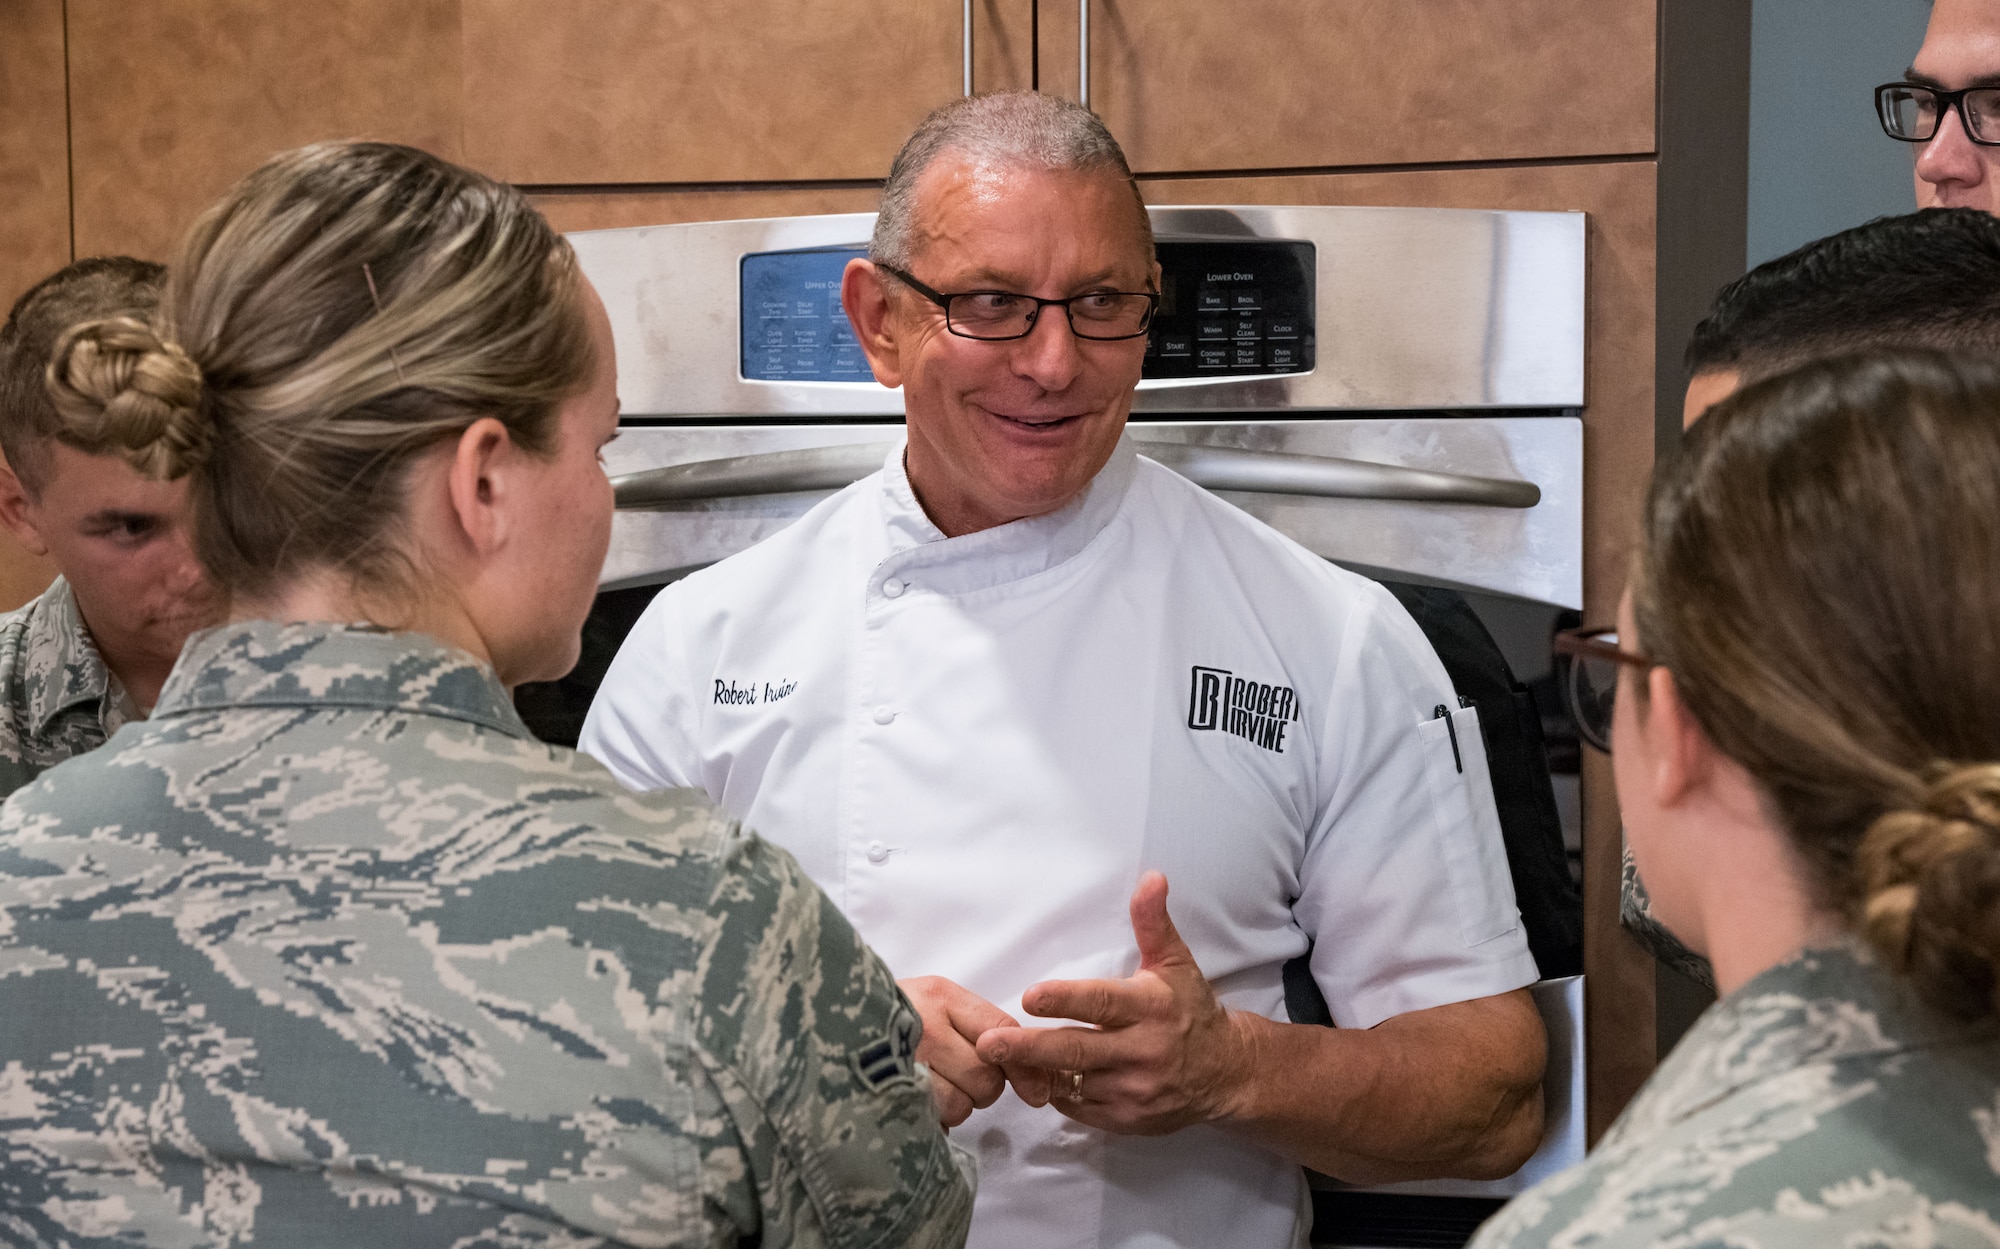 Chef Robert Irvine talks with Airmen at the end of Dorm to Gourm, Aug. 27, 2019, at Dover Air Force Base, Del. Irvine gave his views about career and life choices. (U.S. Air Force photo by Roland Balik)